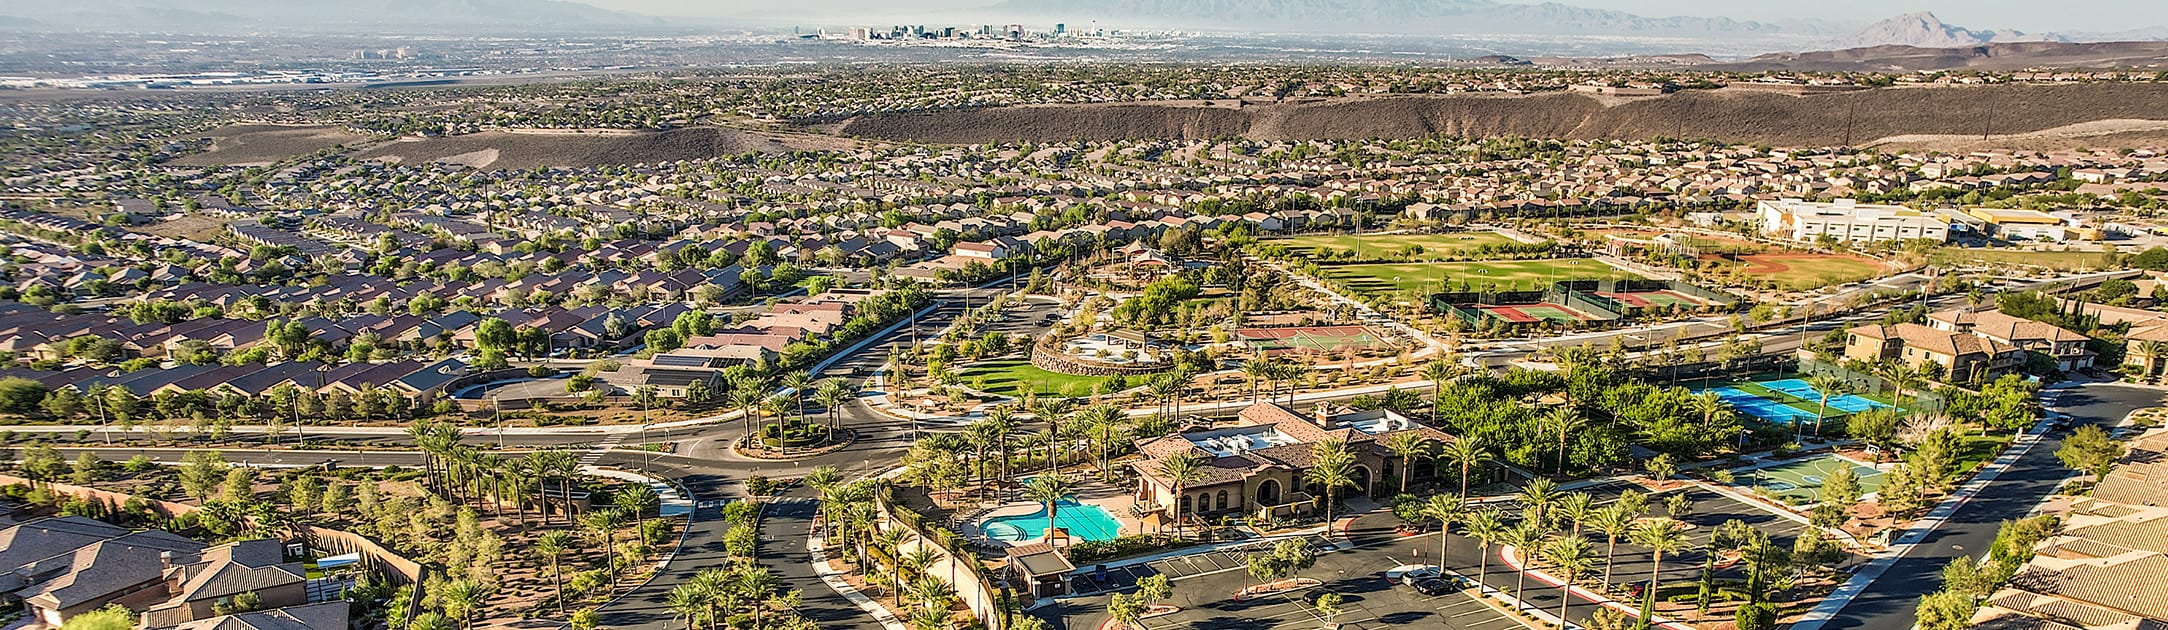 Aerial view of neighborhood with a street roundabout and 2 pools.